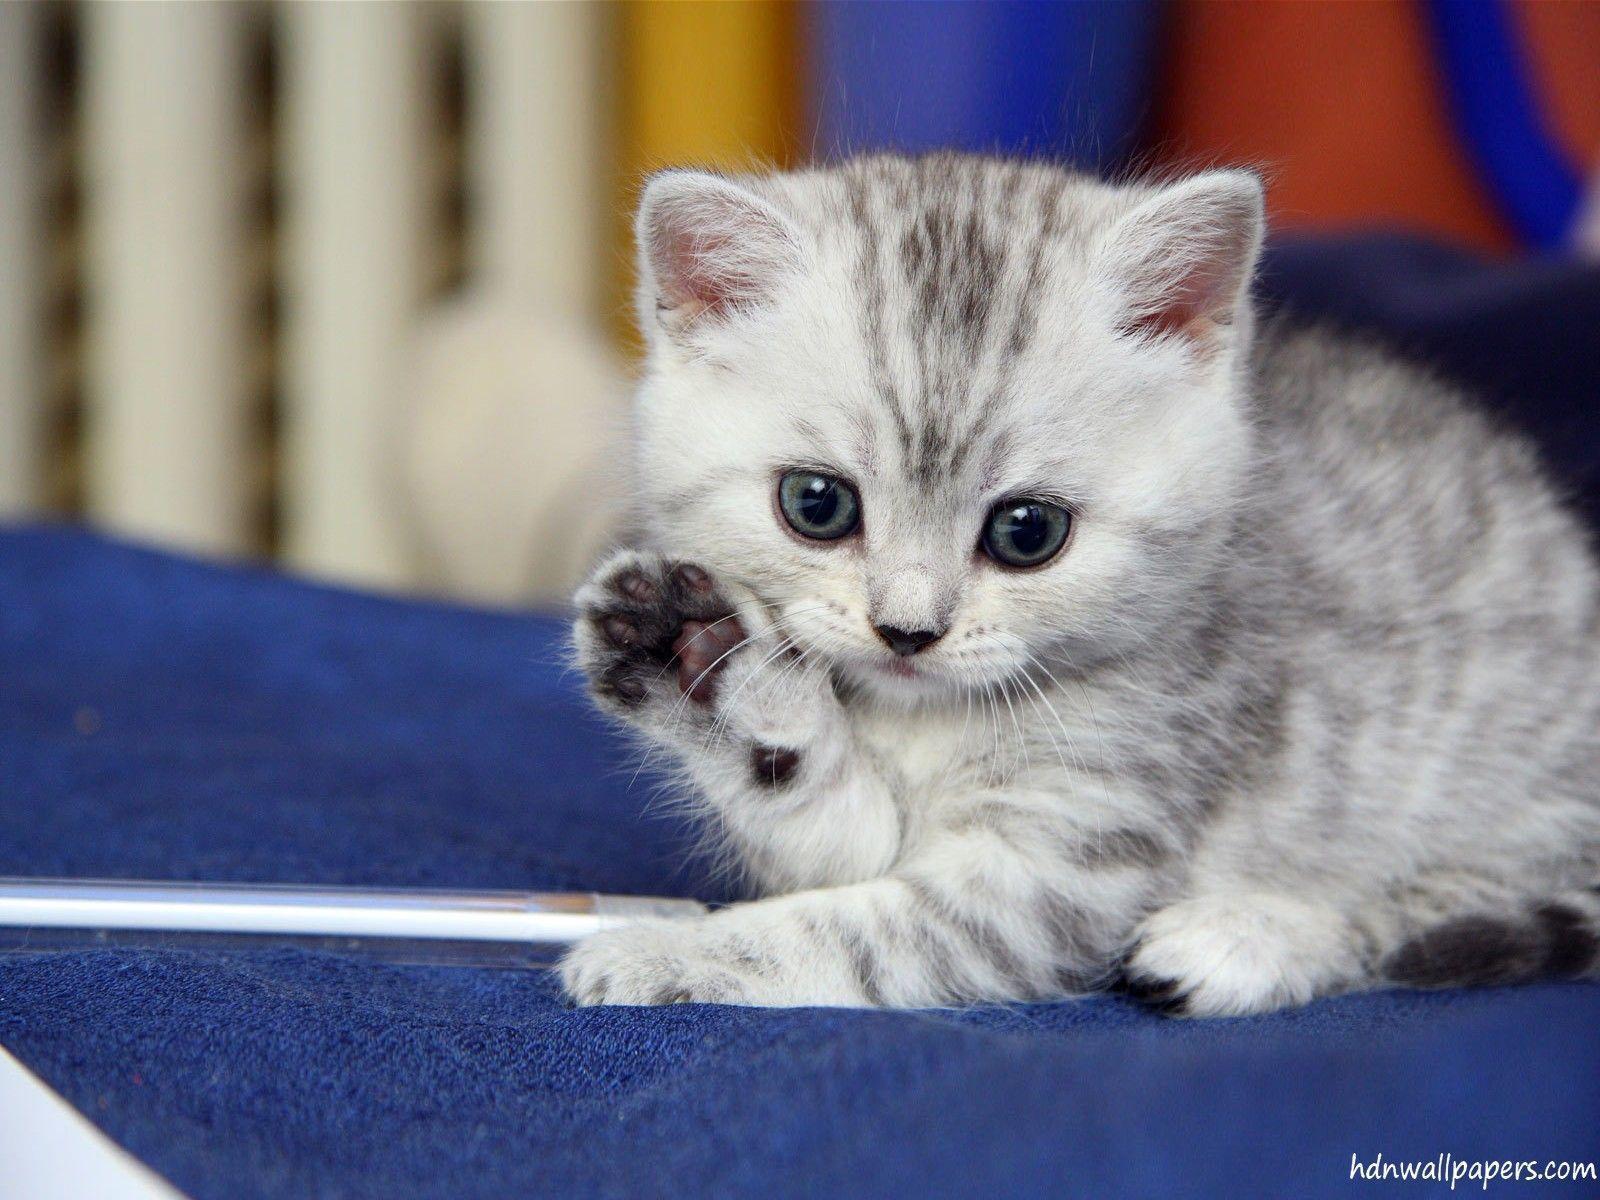 Kitten Cute Cat Images Download / Cute Kitten Wallpapers Those Can Make